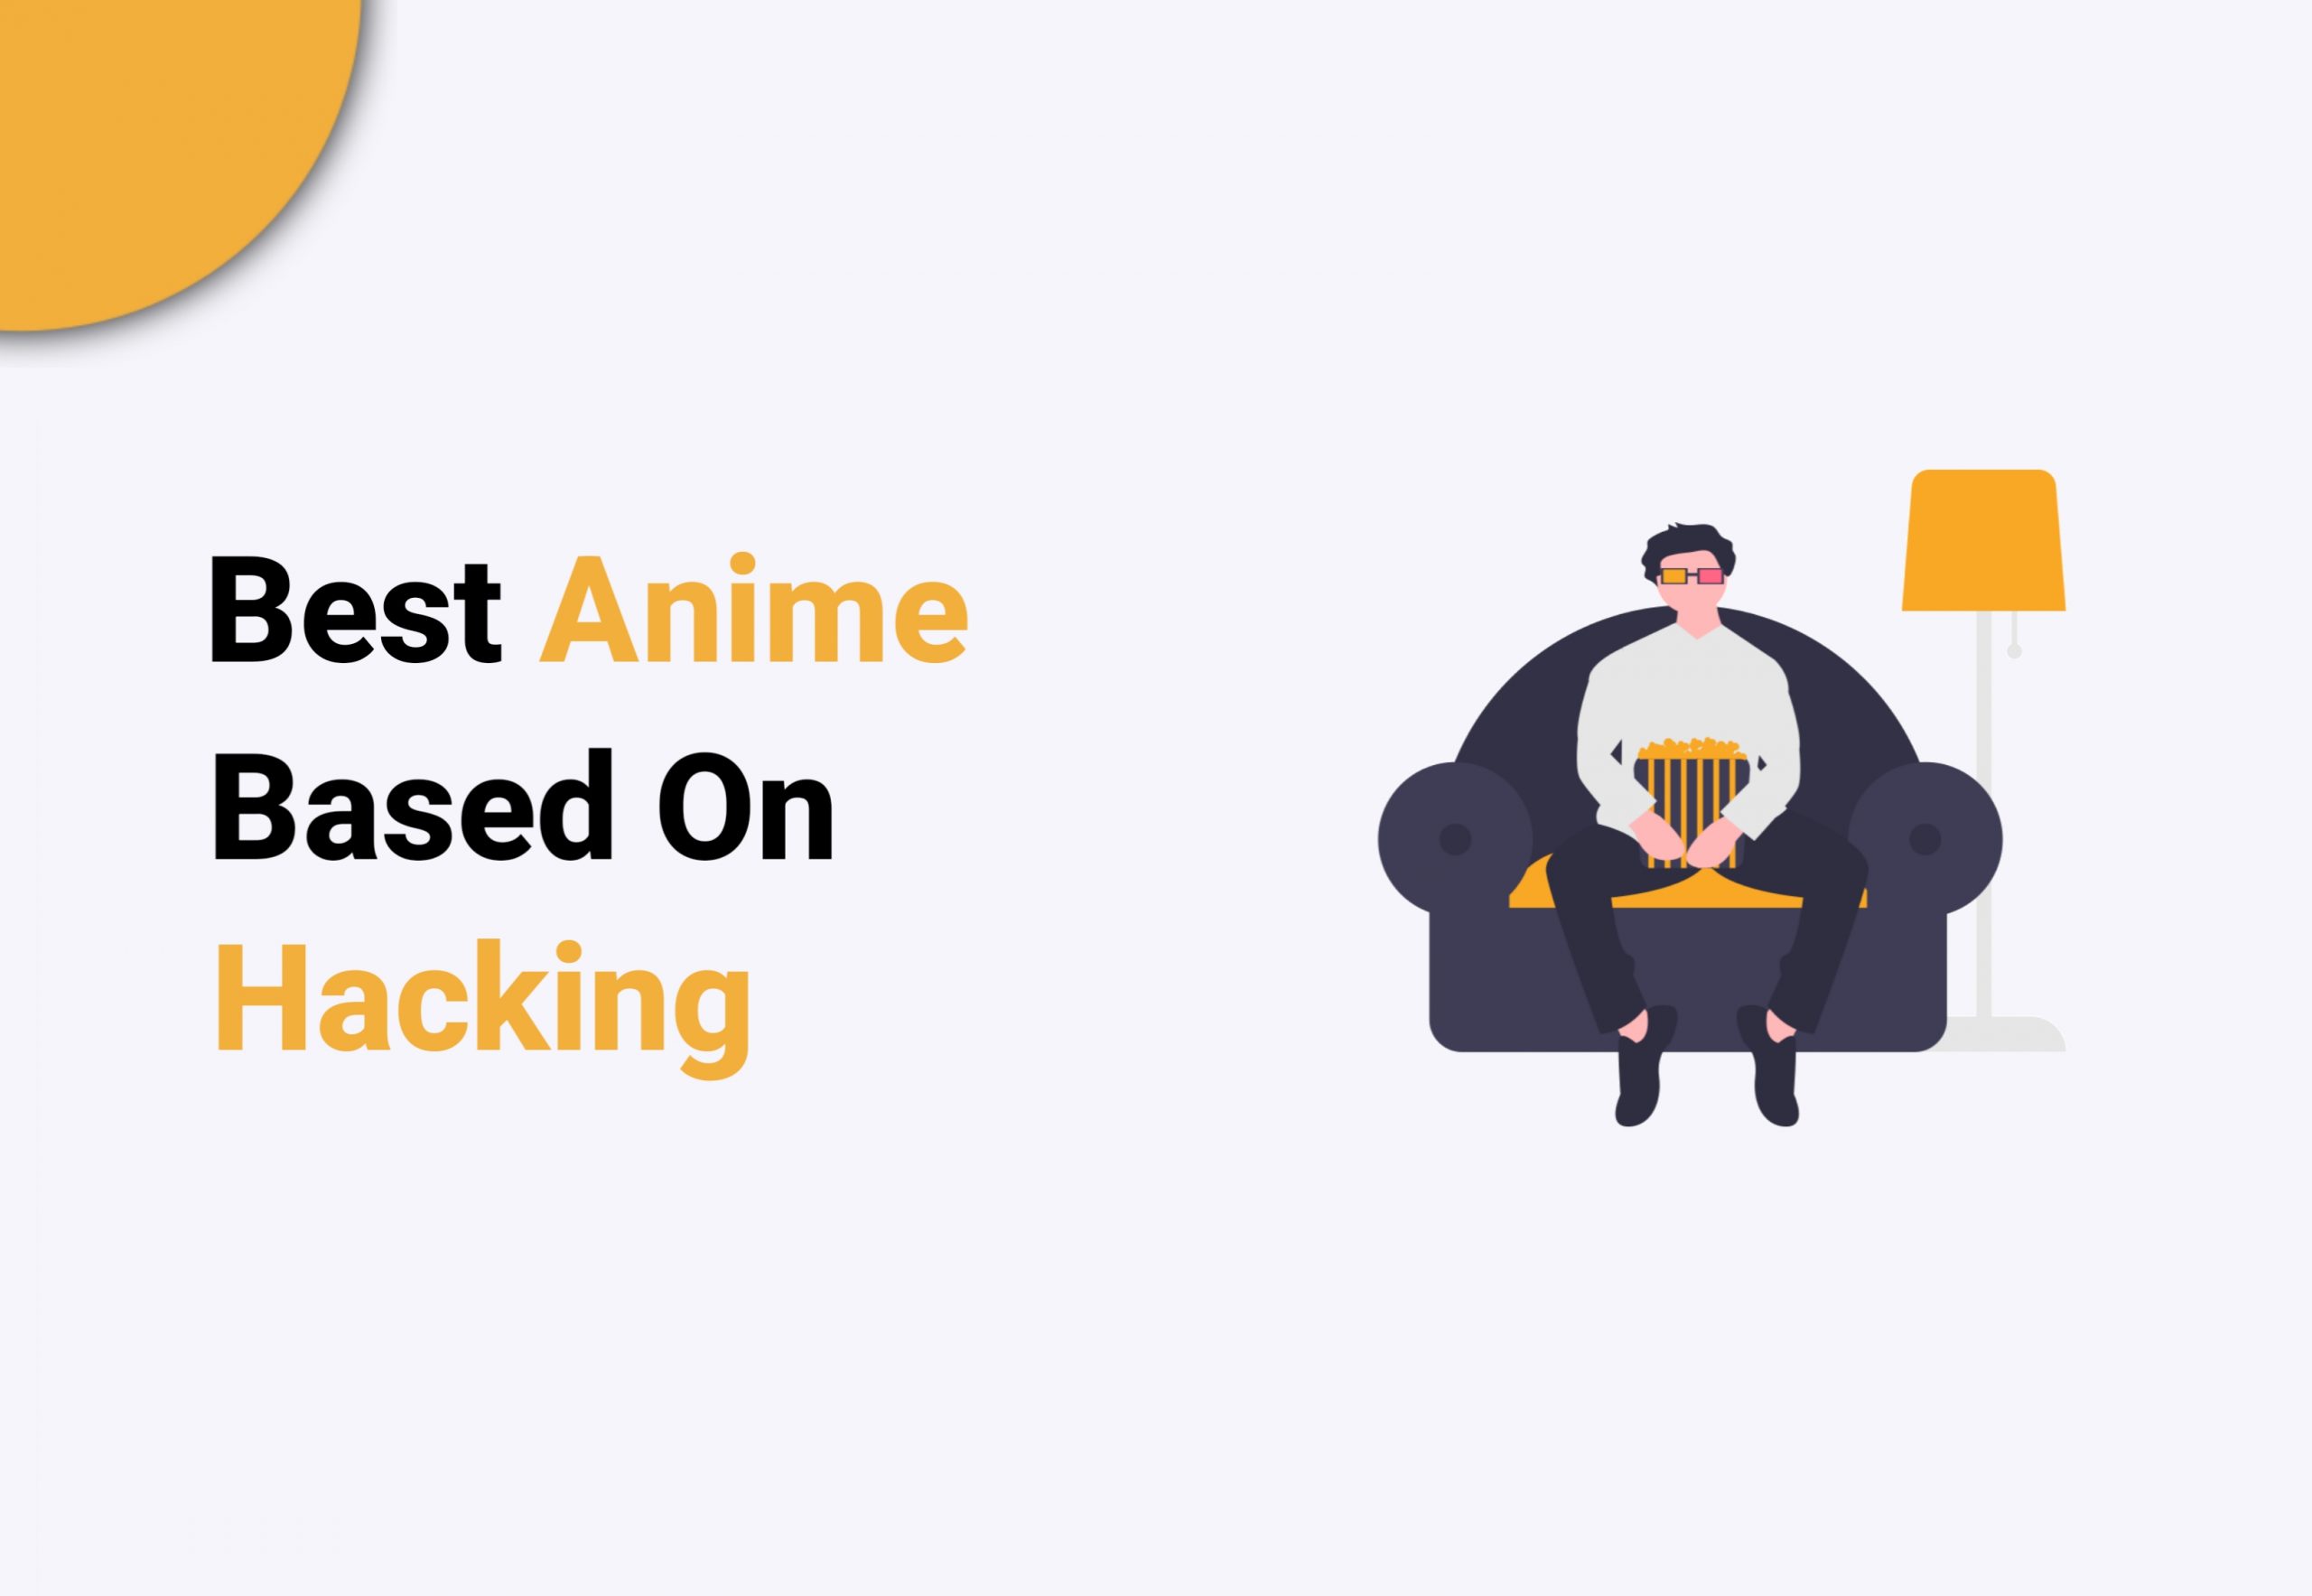 Best Anime Series Based On Hacking